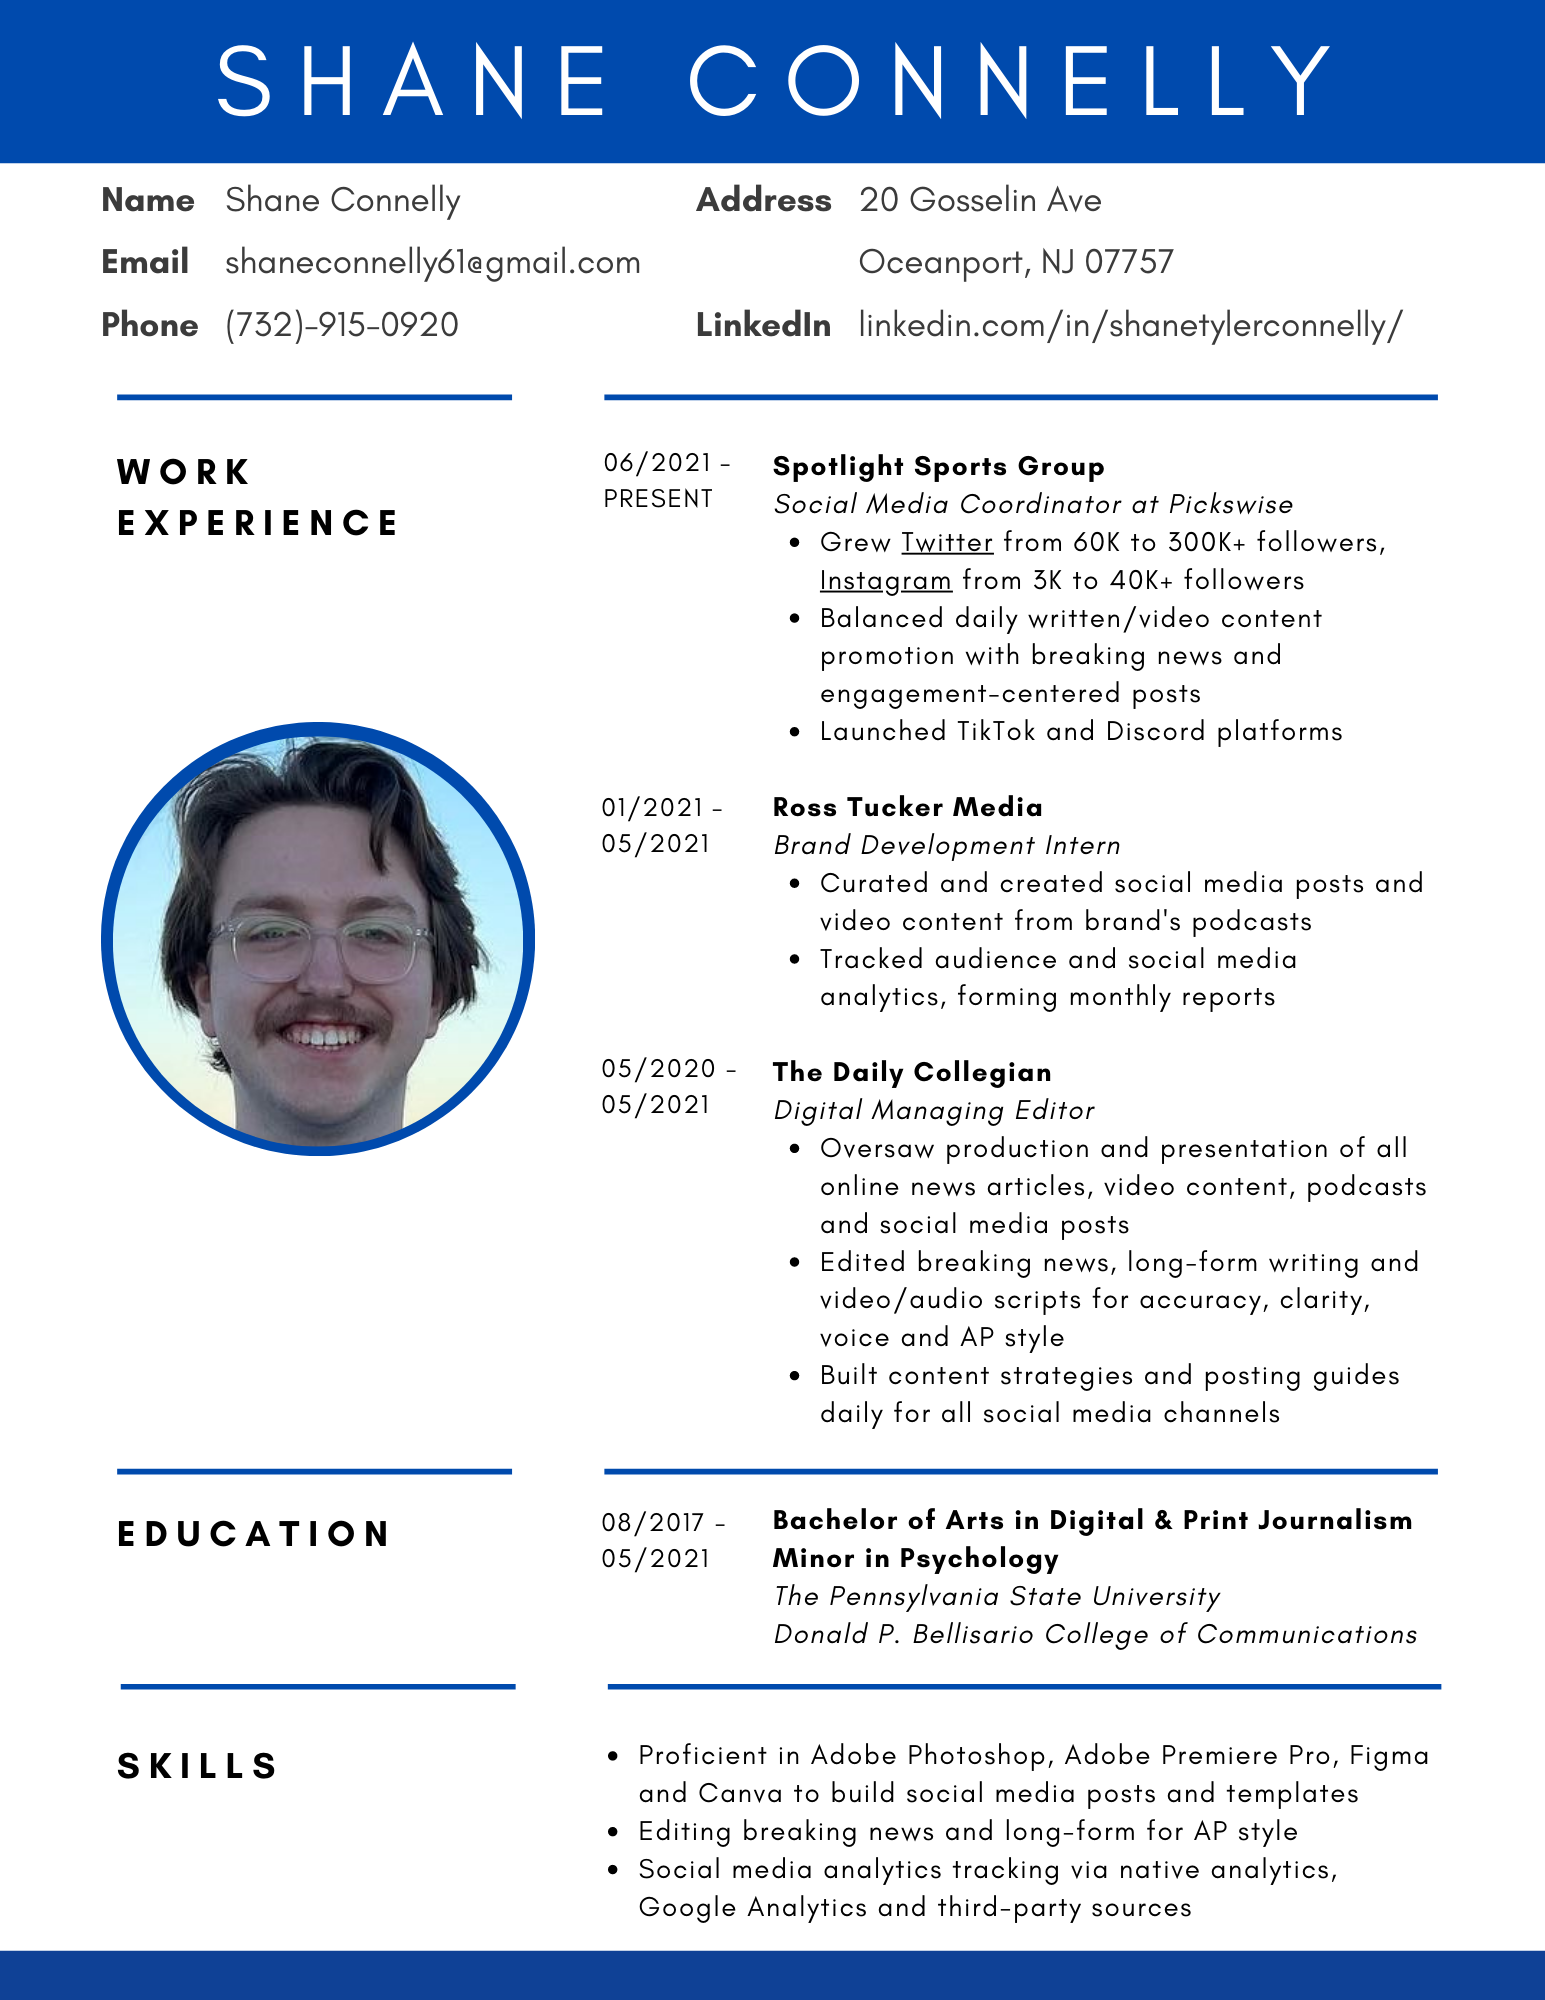 Shane Connelly Resume